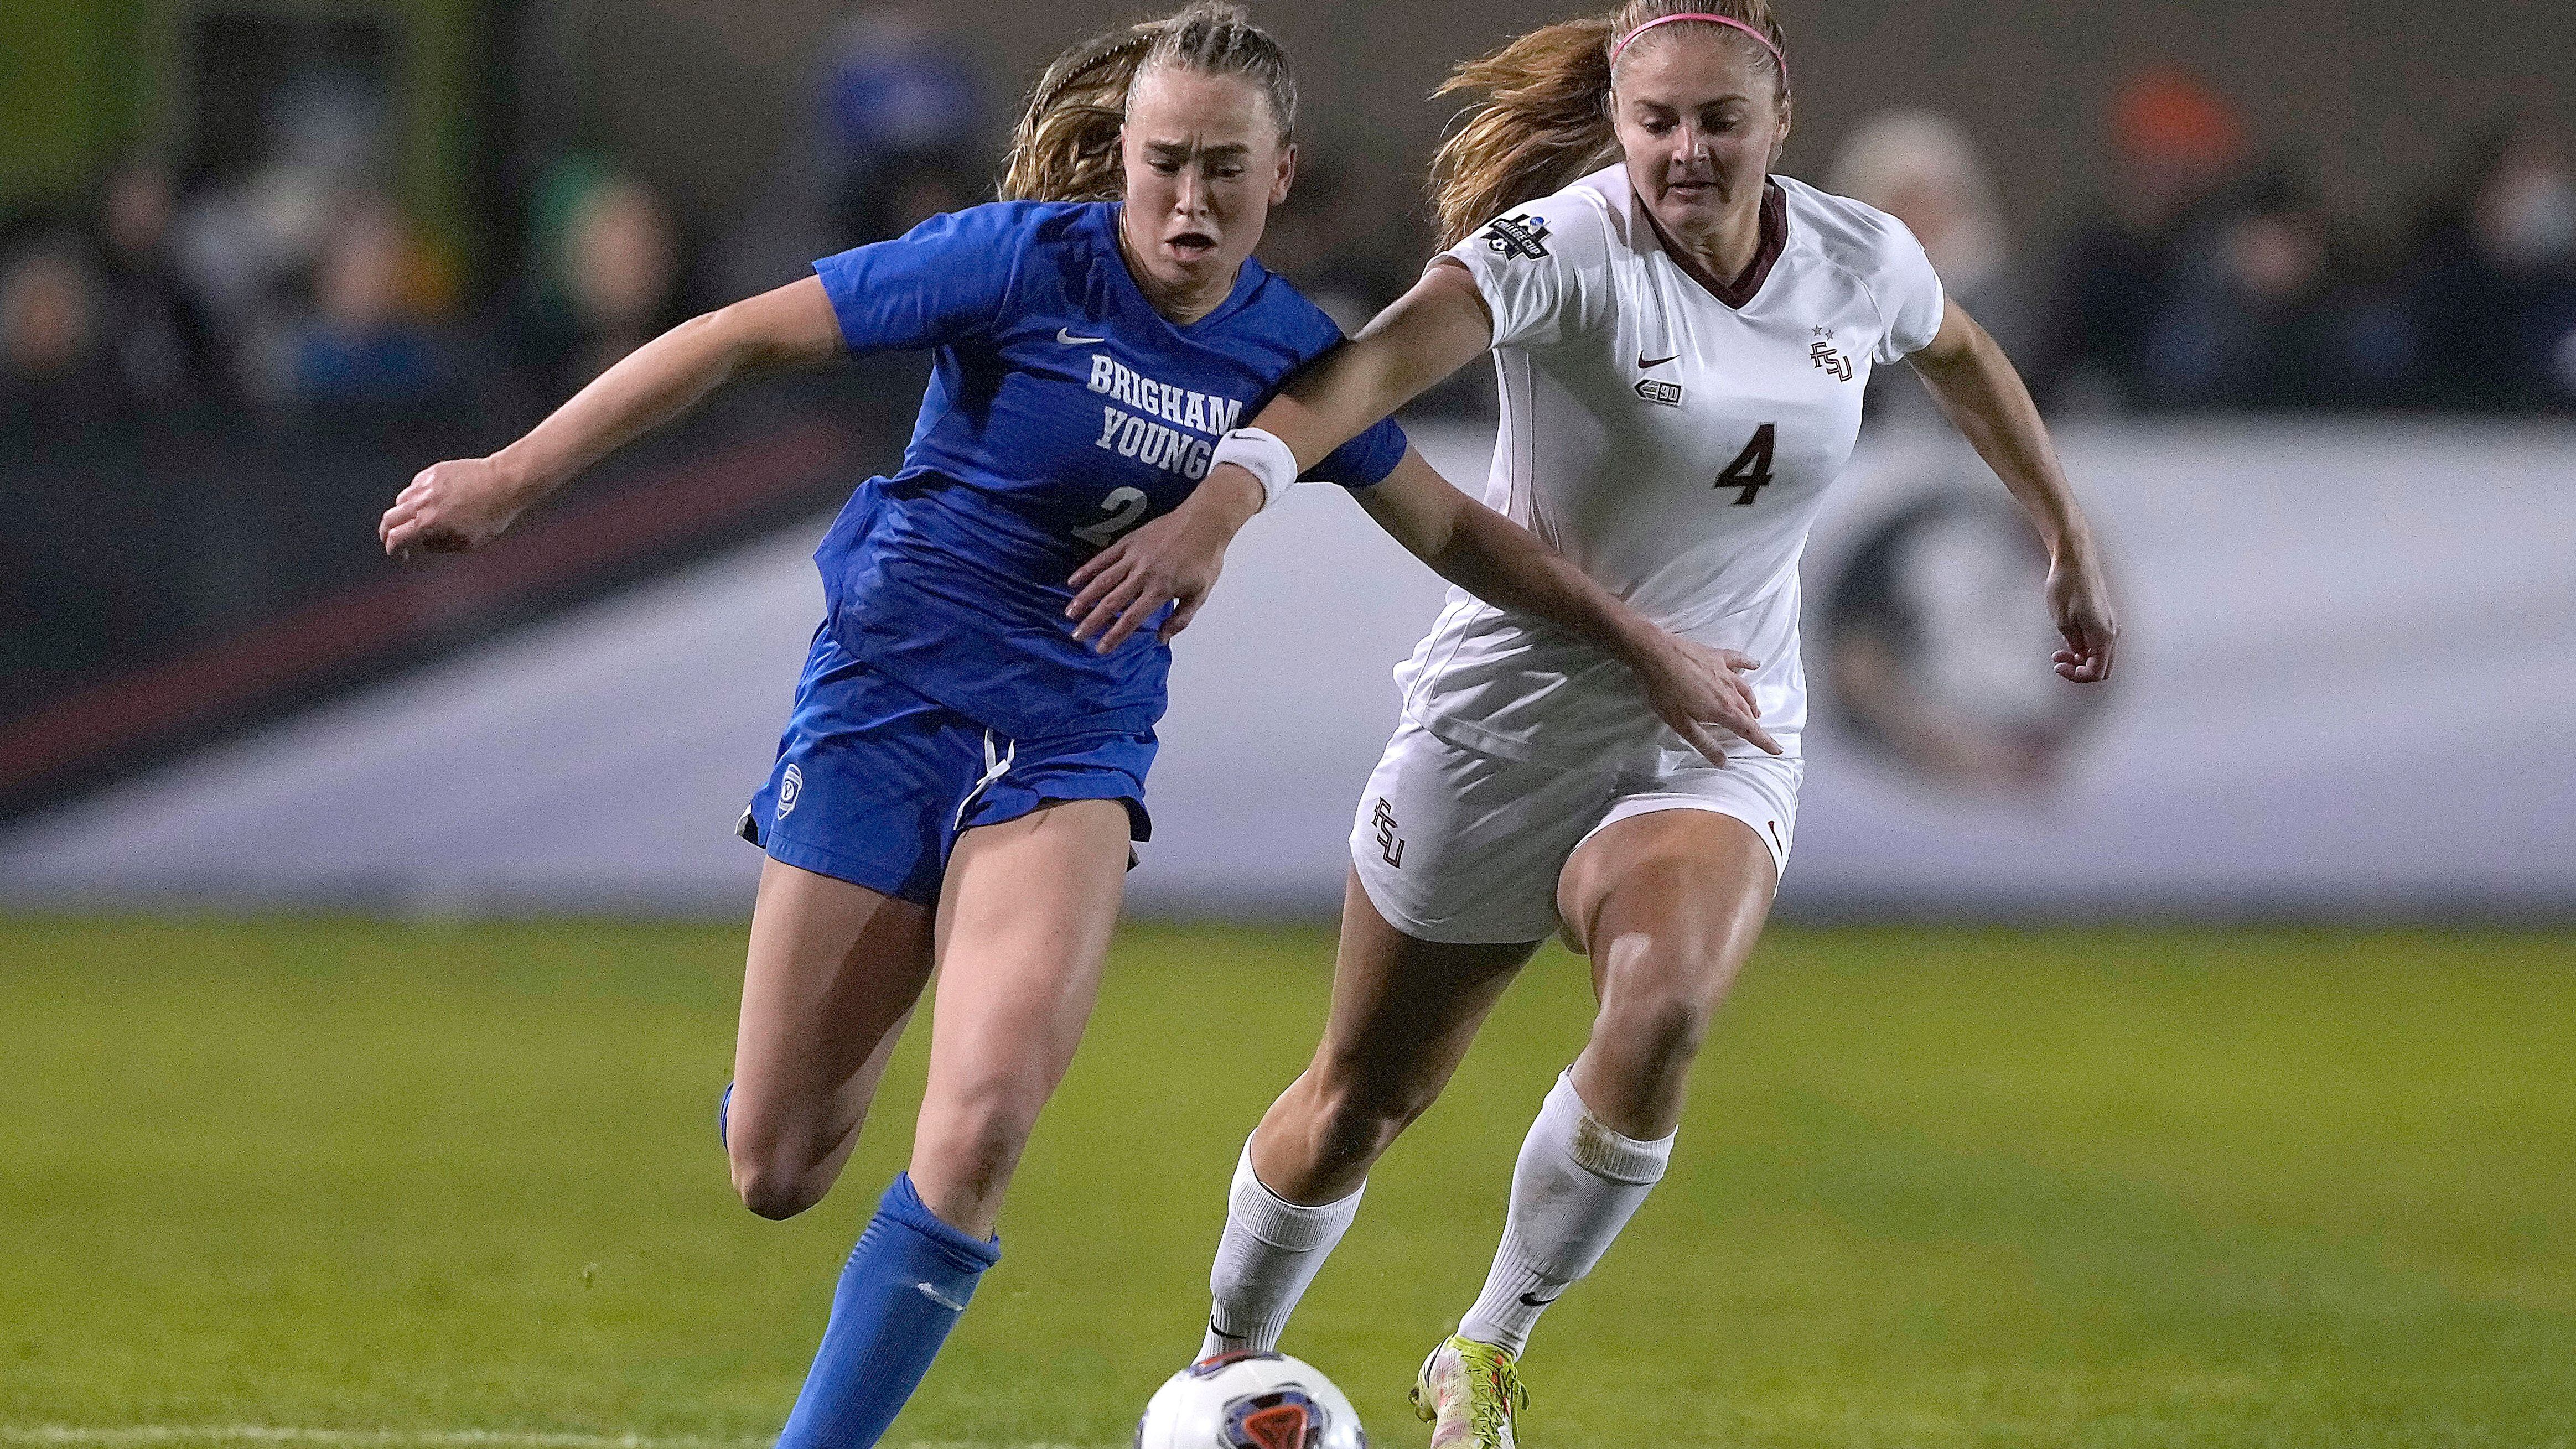 BYU climbs to No. 1 in latest NCAA Women's Soccer Rankings